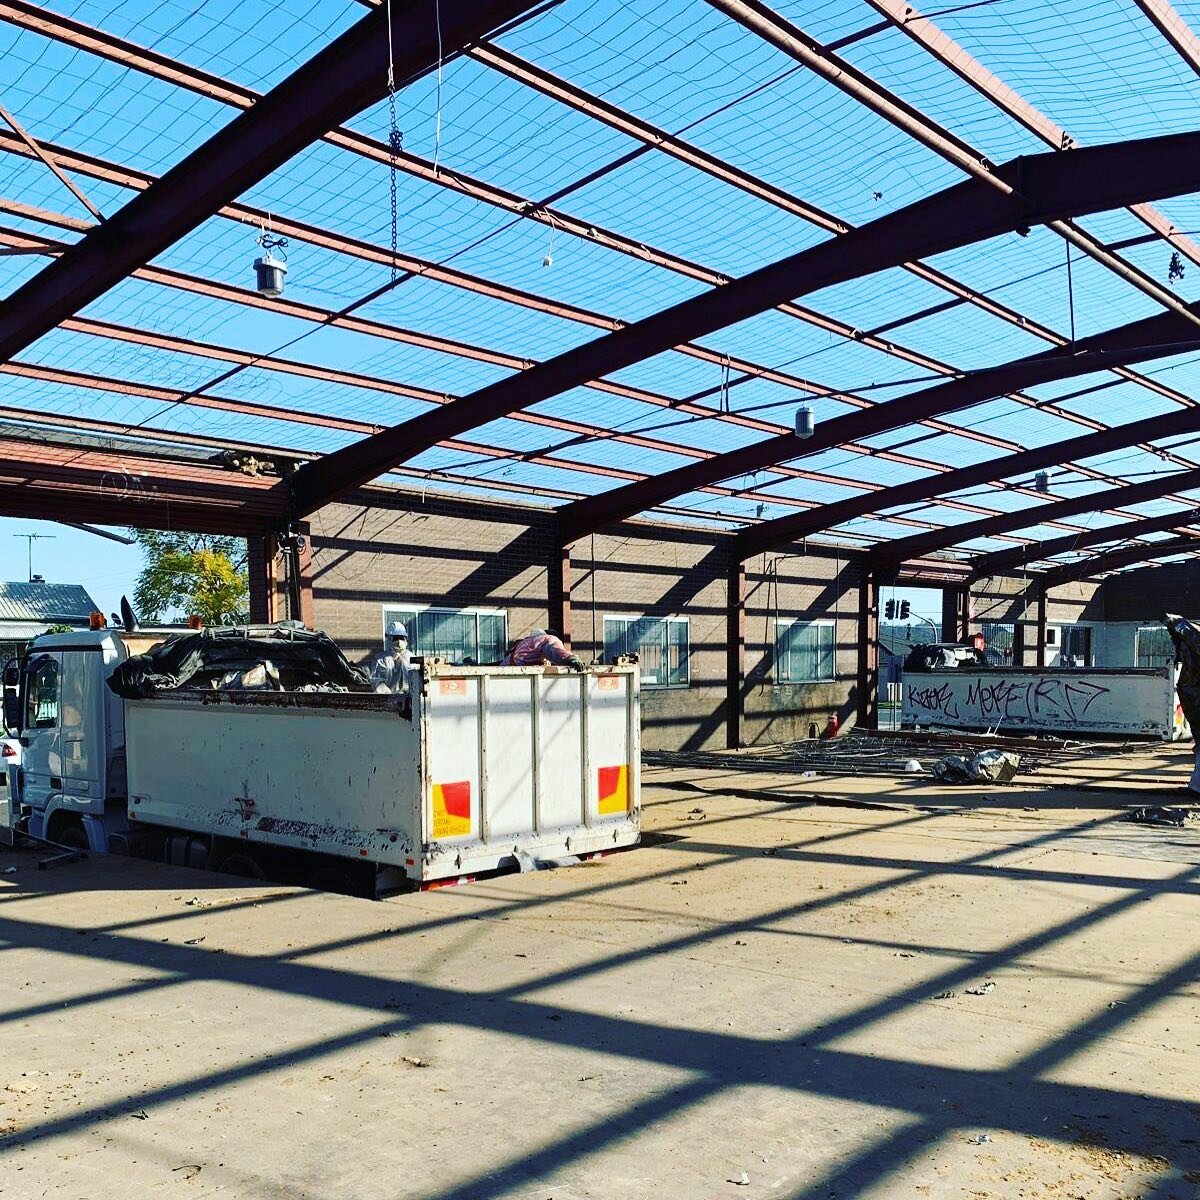 Enquire about our commercial asbestos roof removals. Not only do we ensure everybody&rsquo;s safety onsite, we deliver clean results every time. 

Call us now on 0406754194 for a free quote and inspection. 

Keep a look out for the final results comi